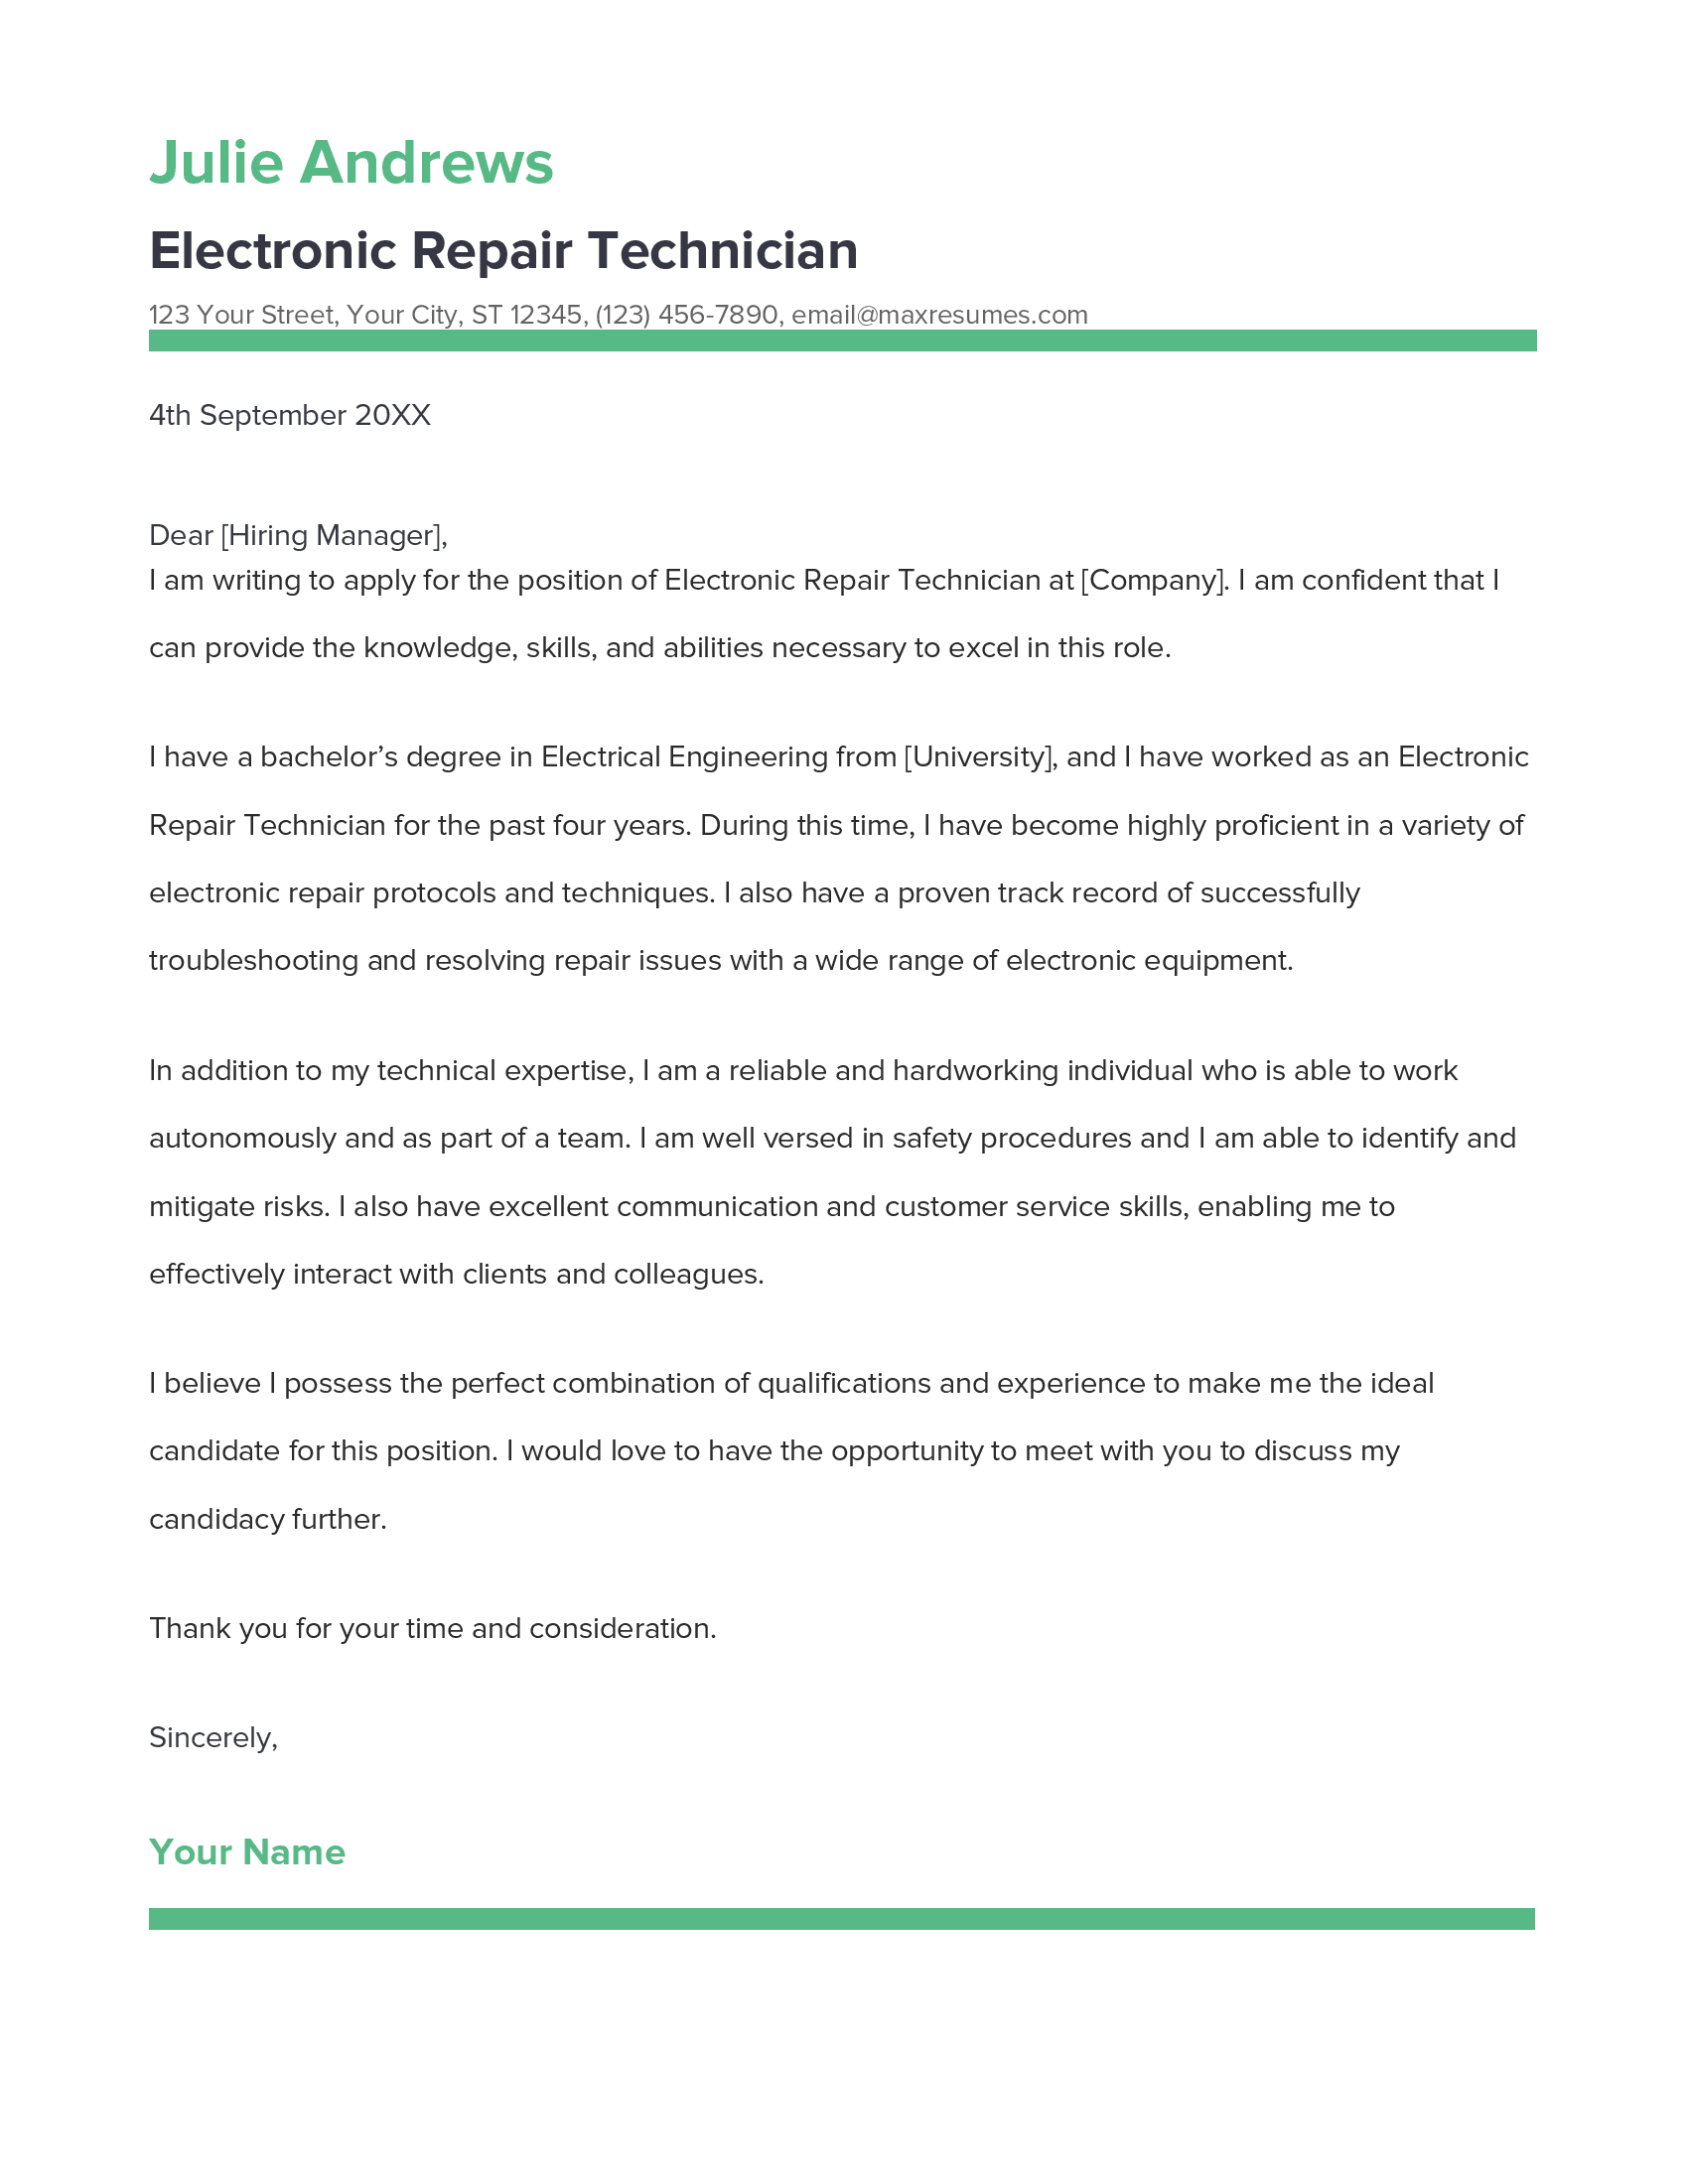 Electronic Repair Technician Cover Letter Example